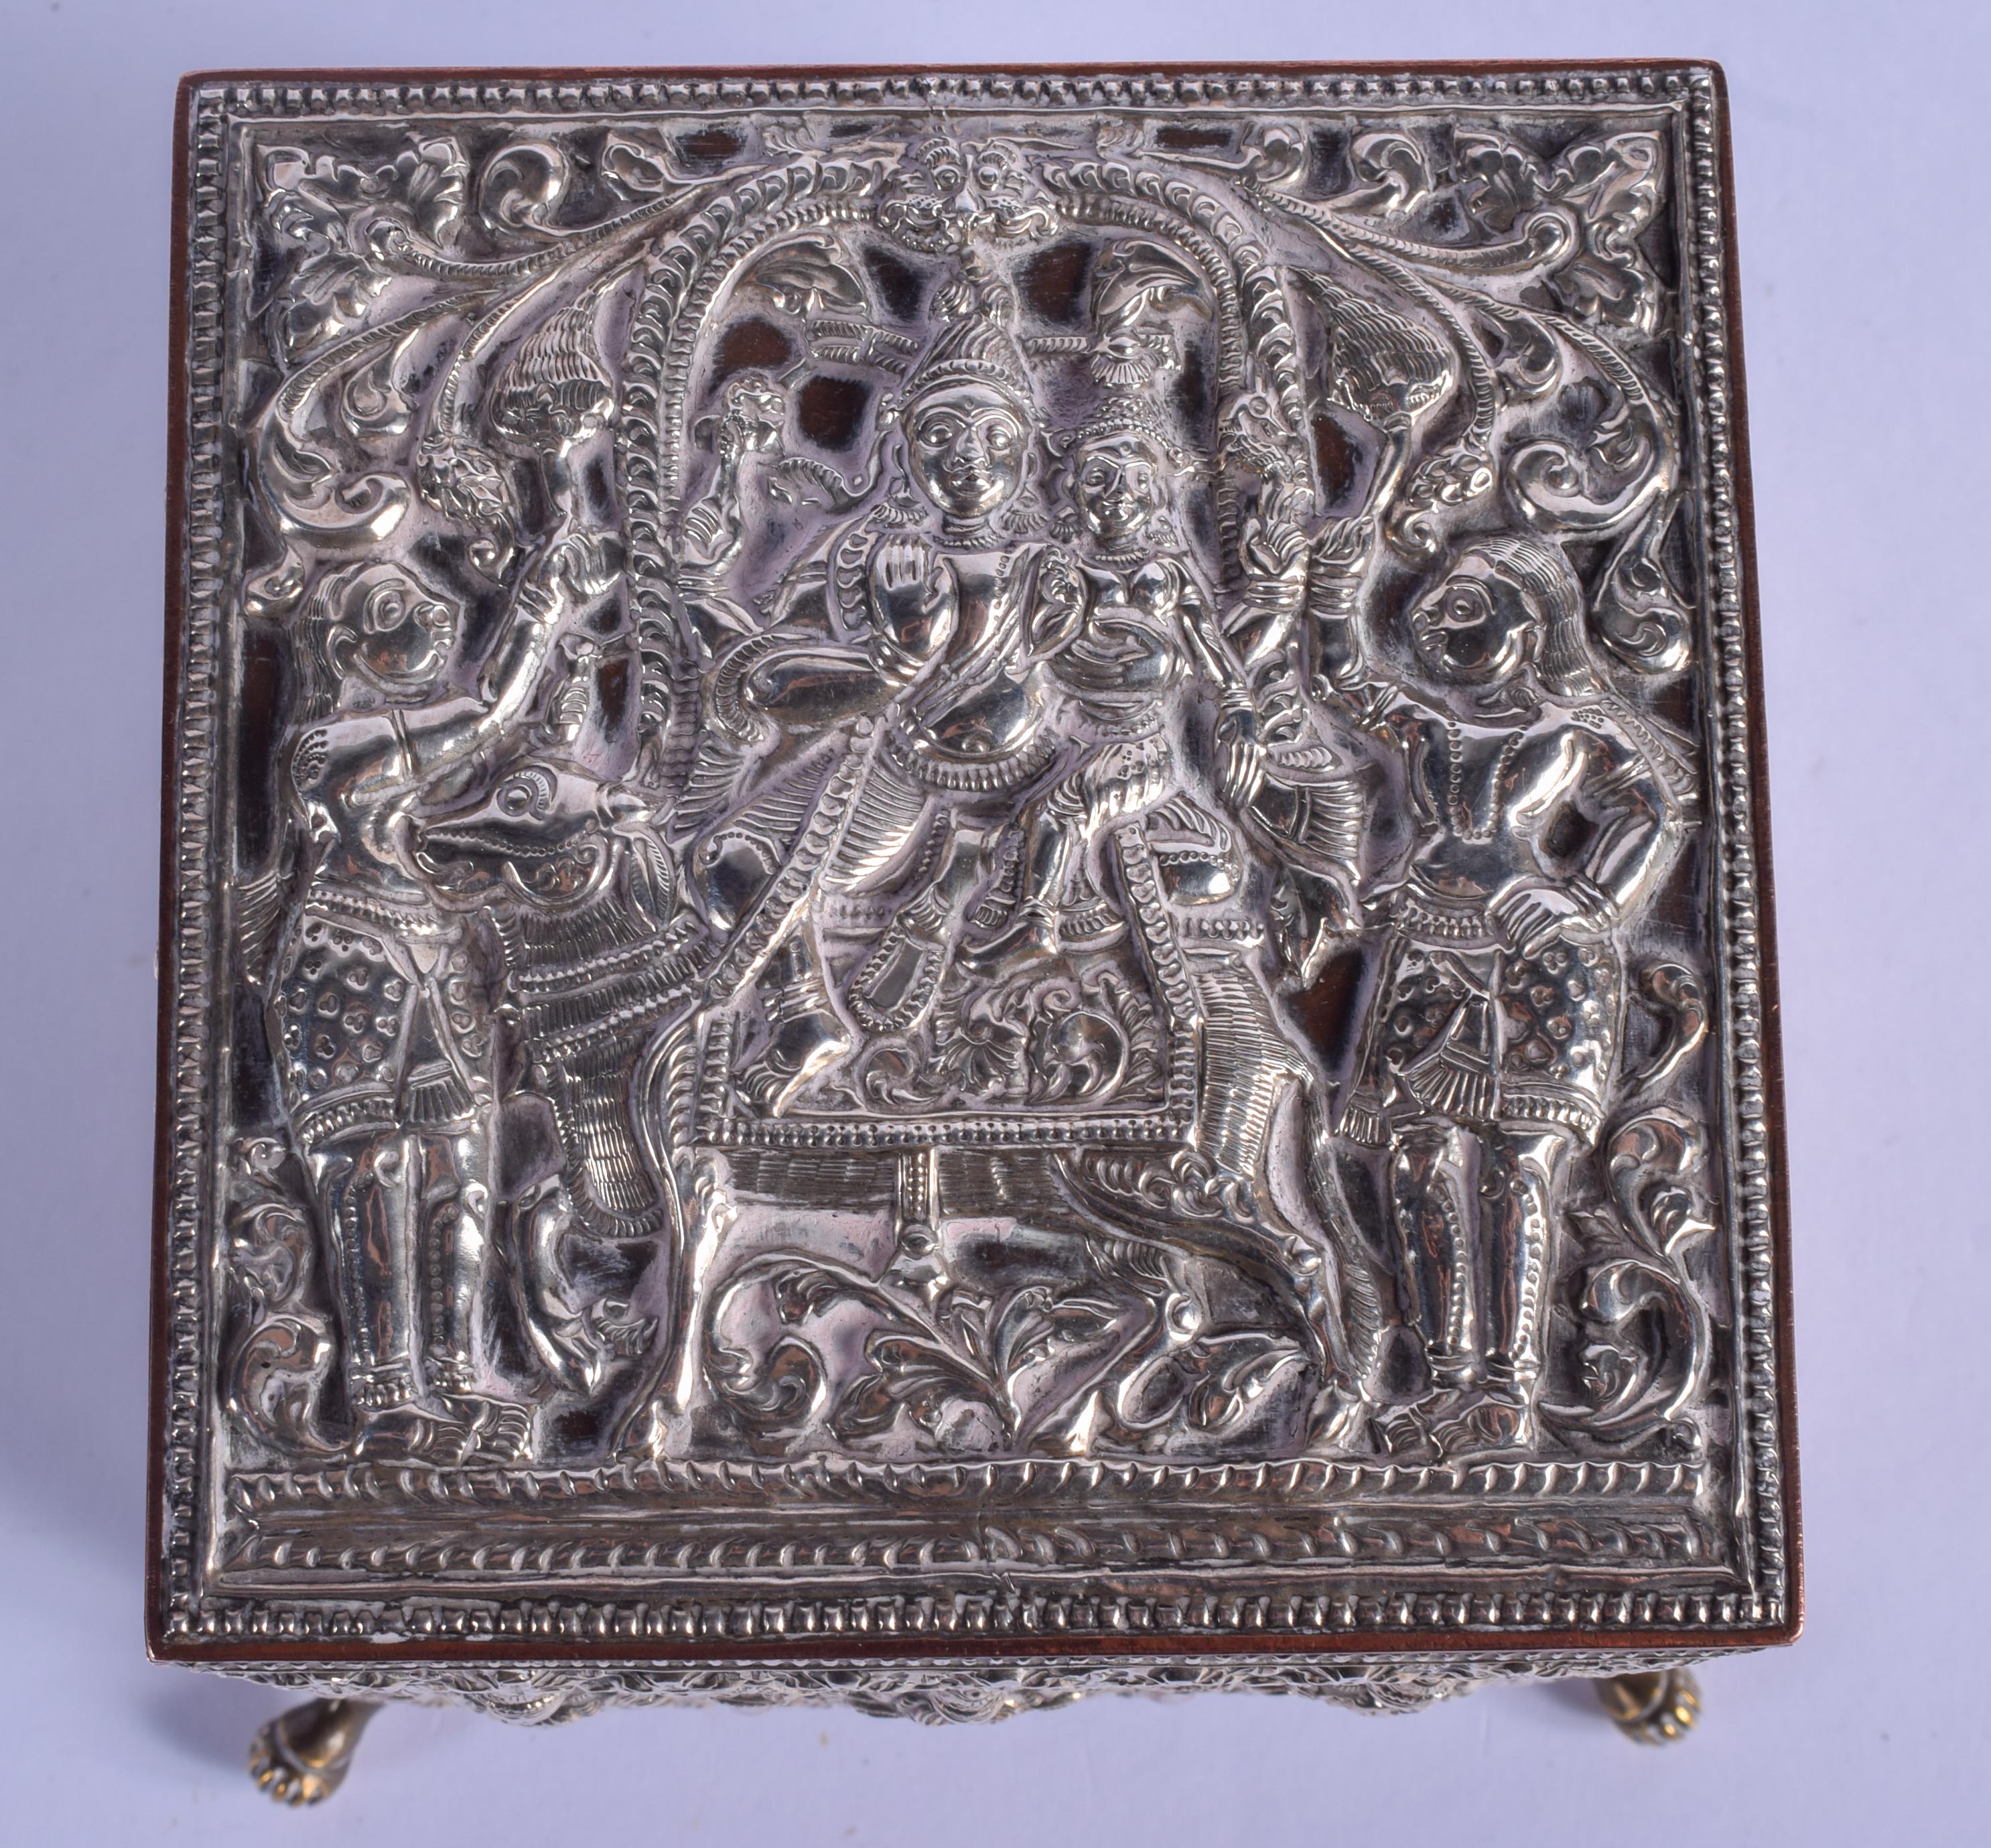 A 19TH CENTURY INDIAN SILVER OVERLAID CASKET decorated with Buddhistic figures. 12 cm x 9 cm. - Image 2 of 5